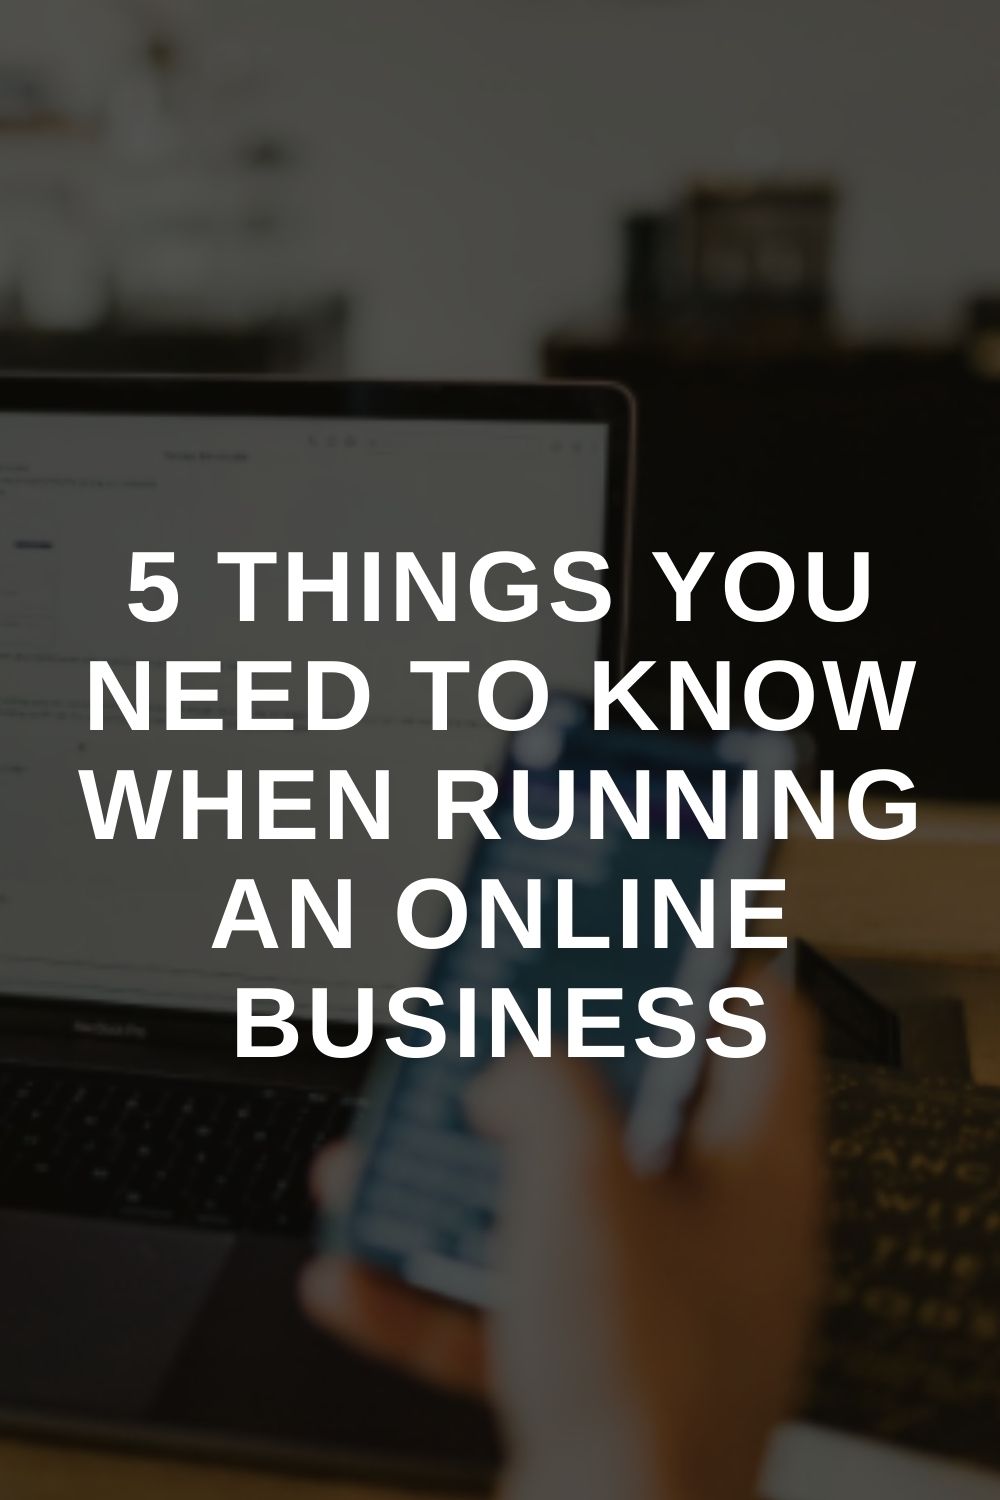 5 Things You Need To Know When Running An Online Business